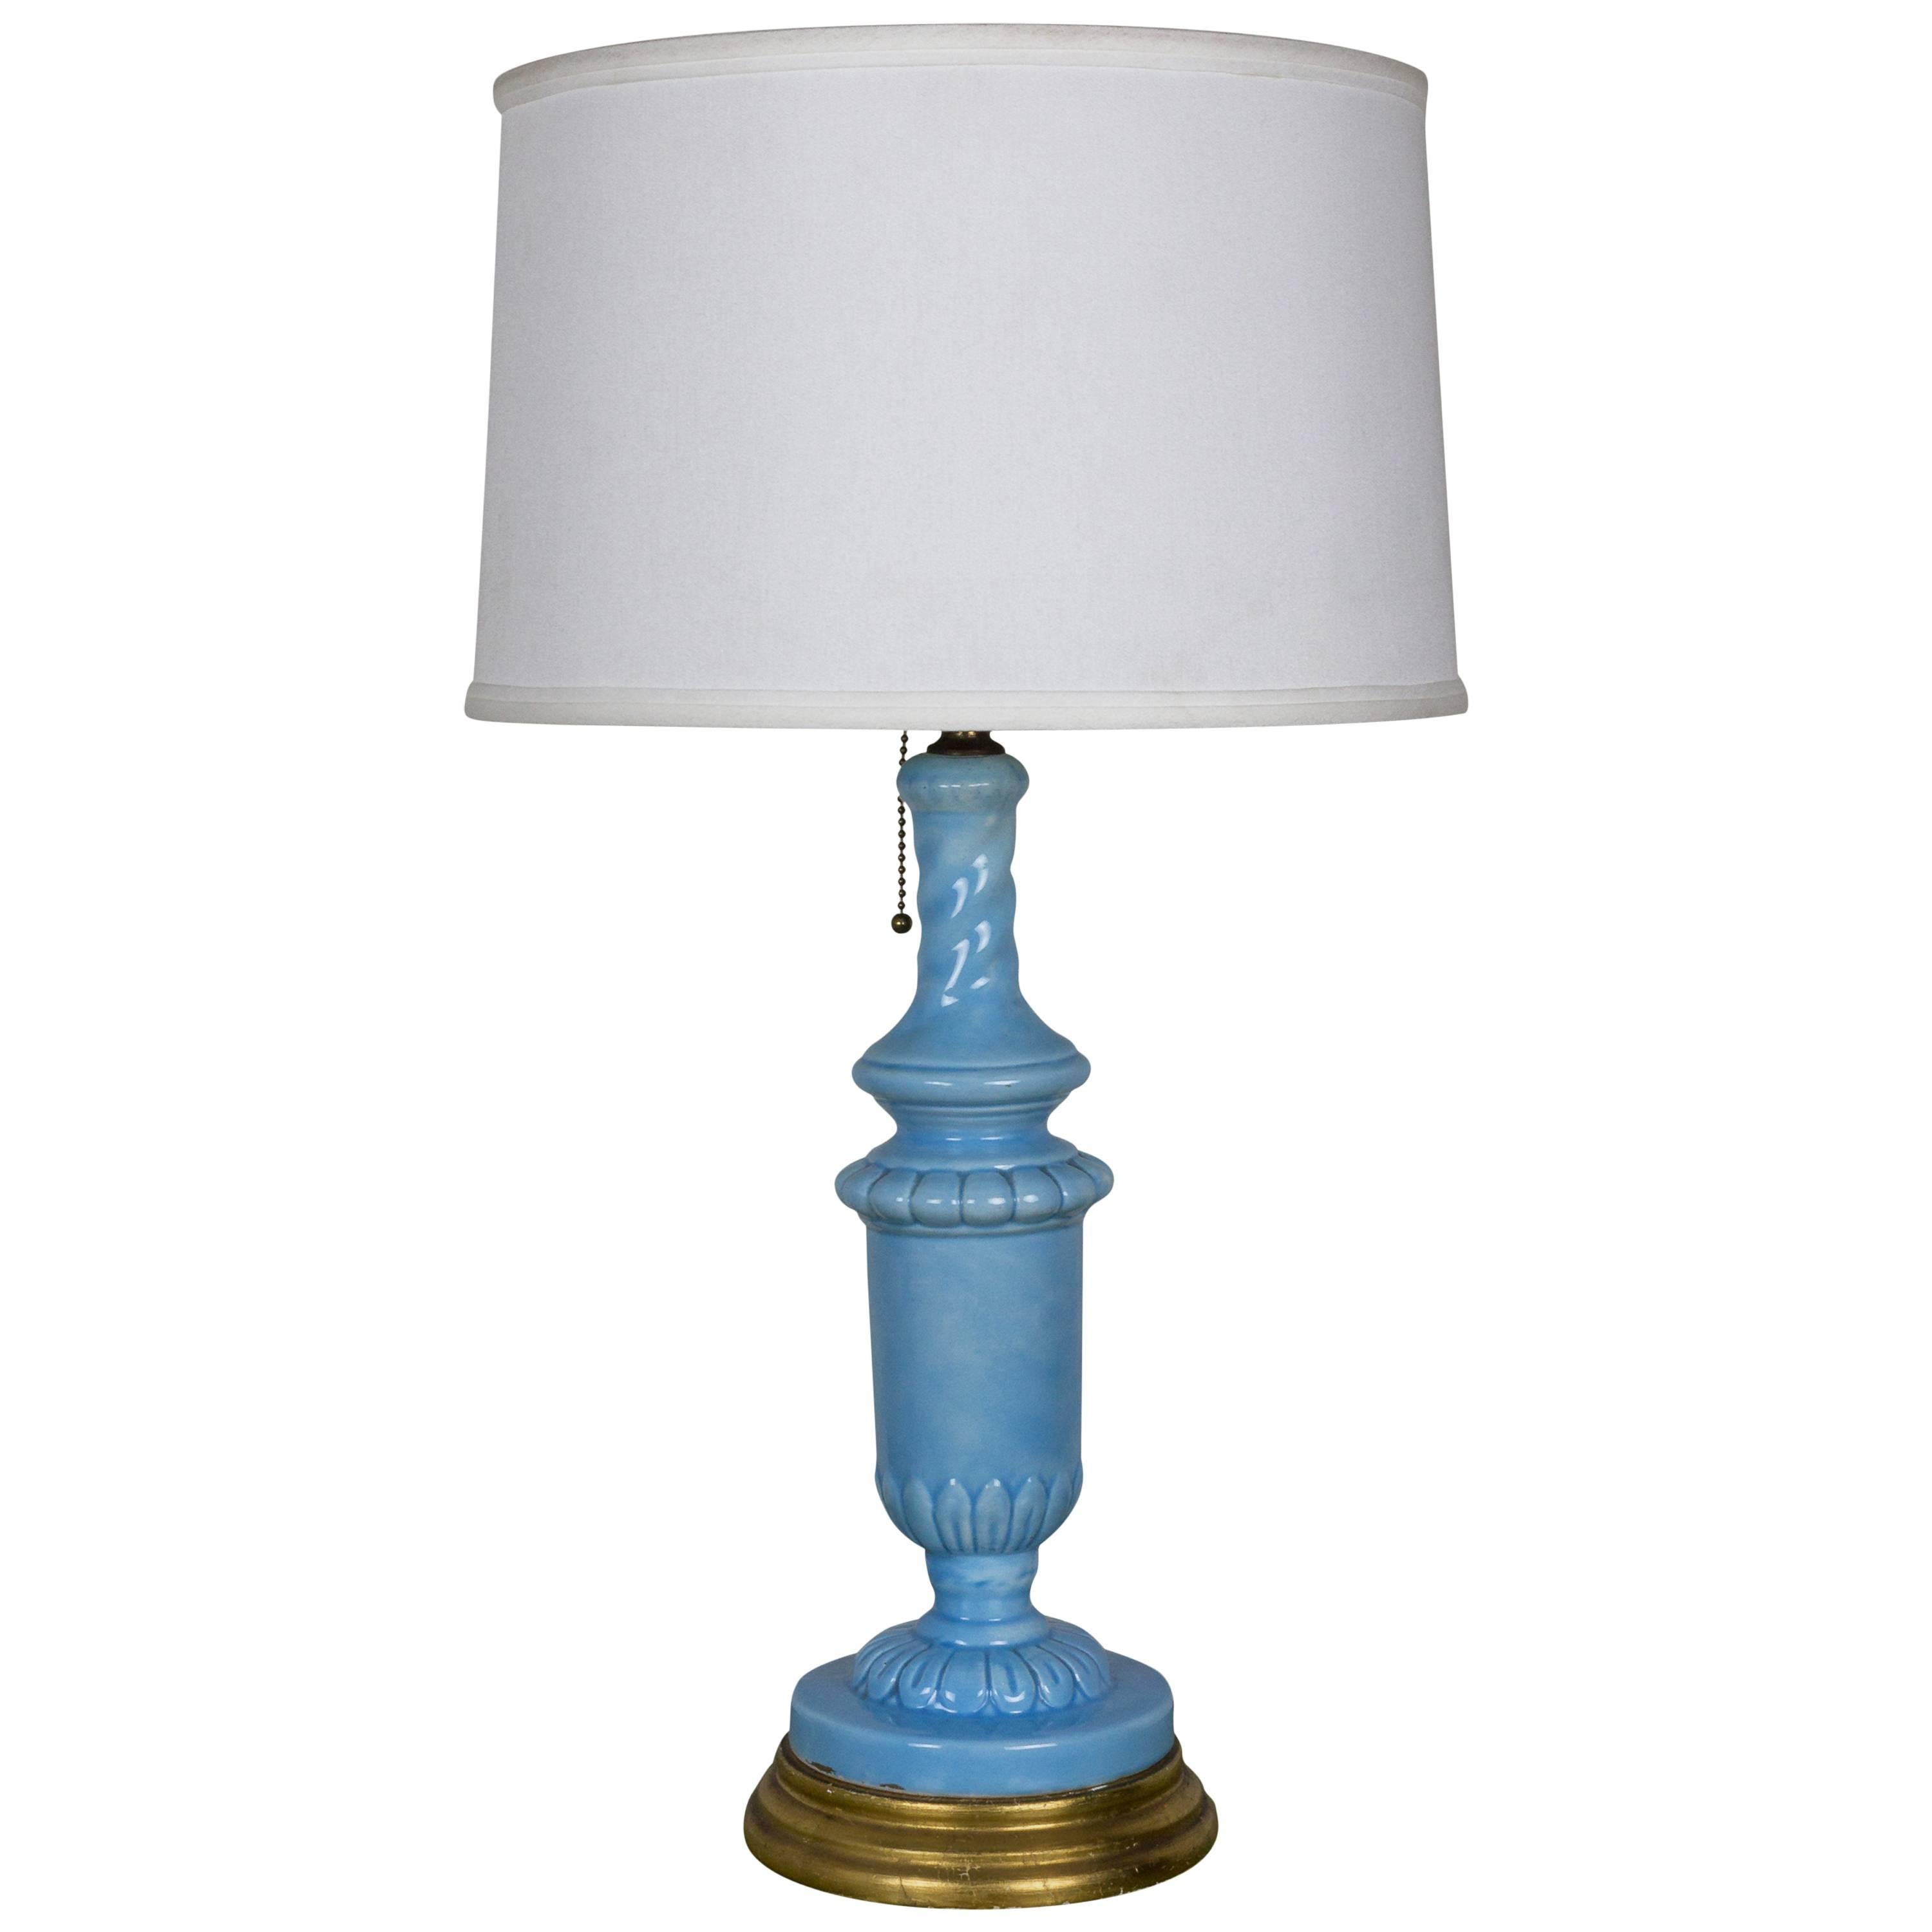 European Periwinkle Blue Ceramic Table Lamp With Giltwood Base For Sale